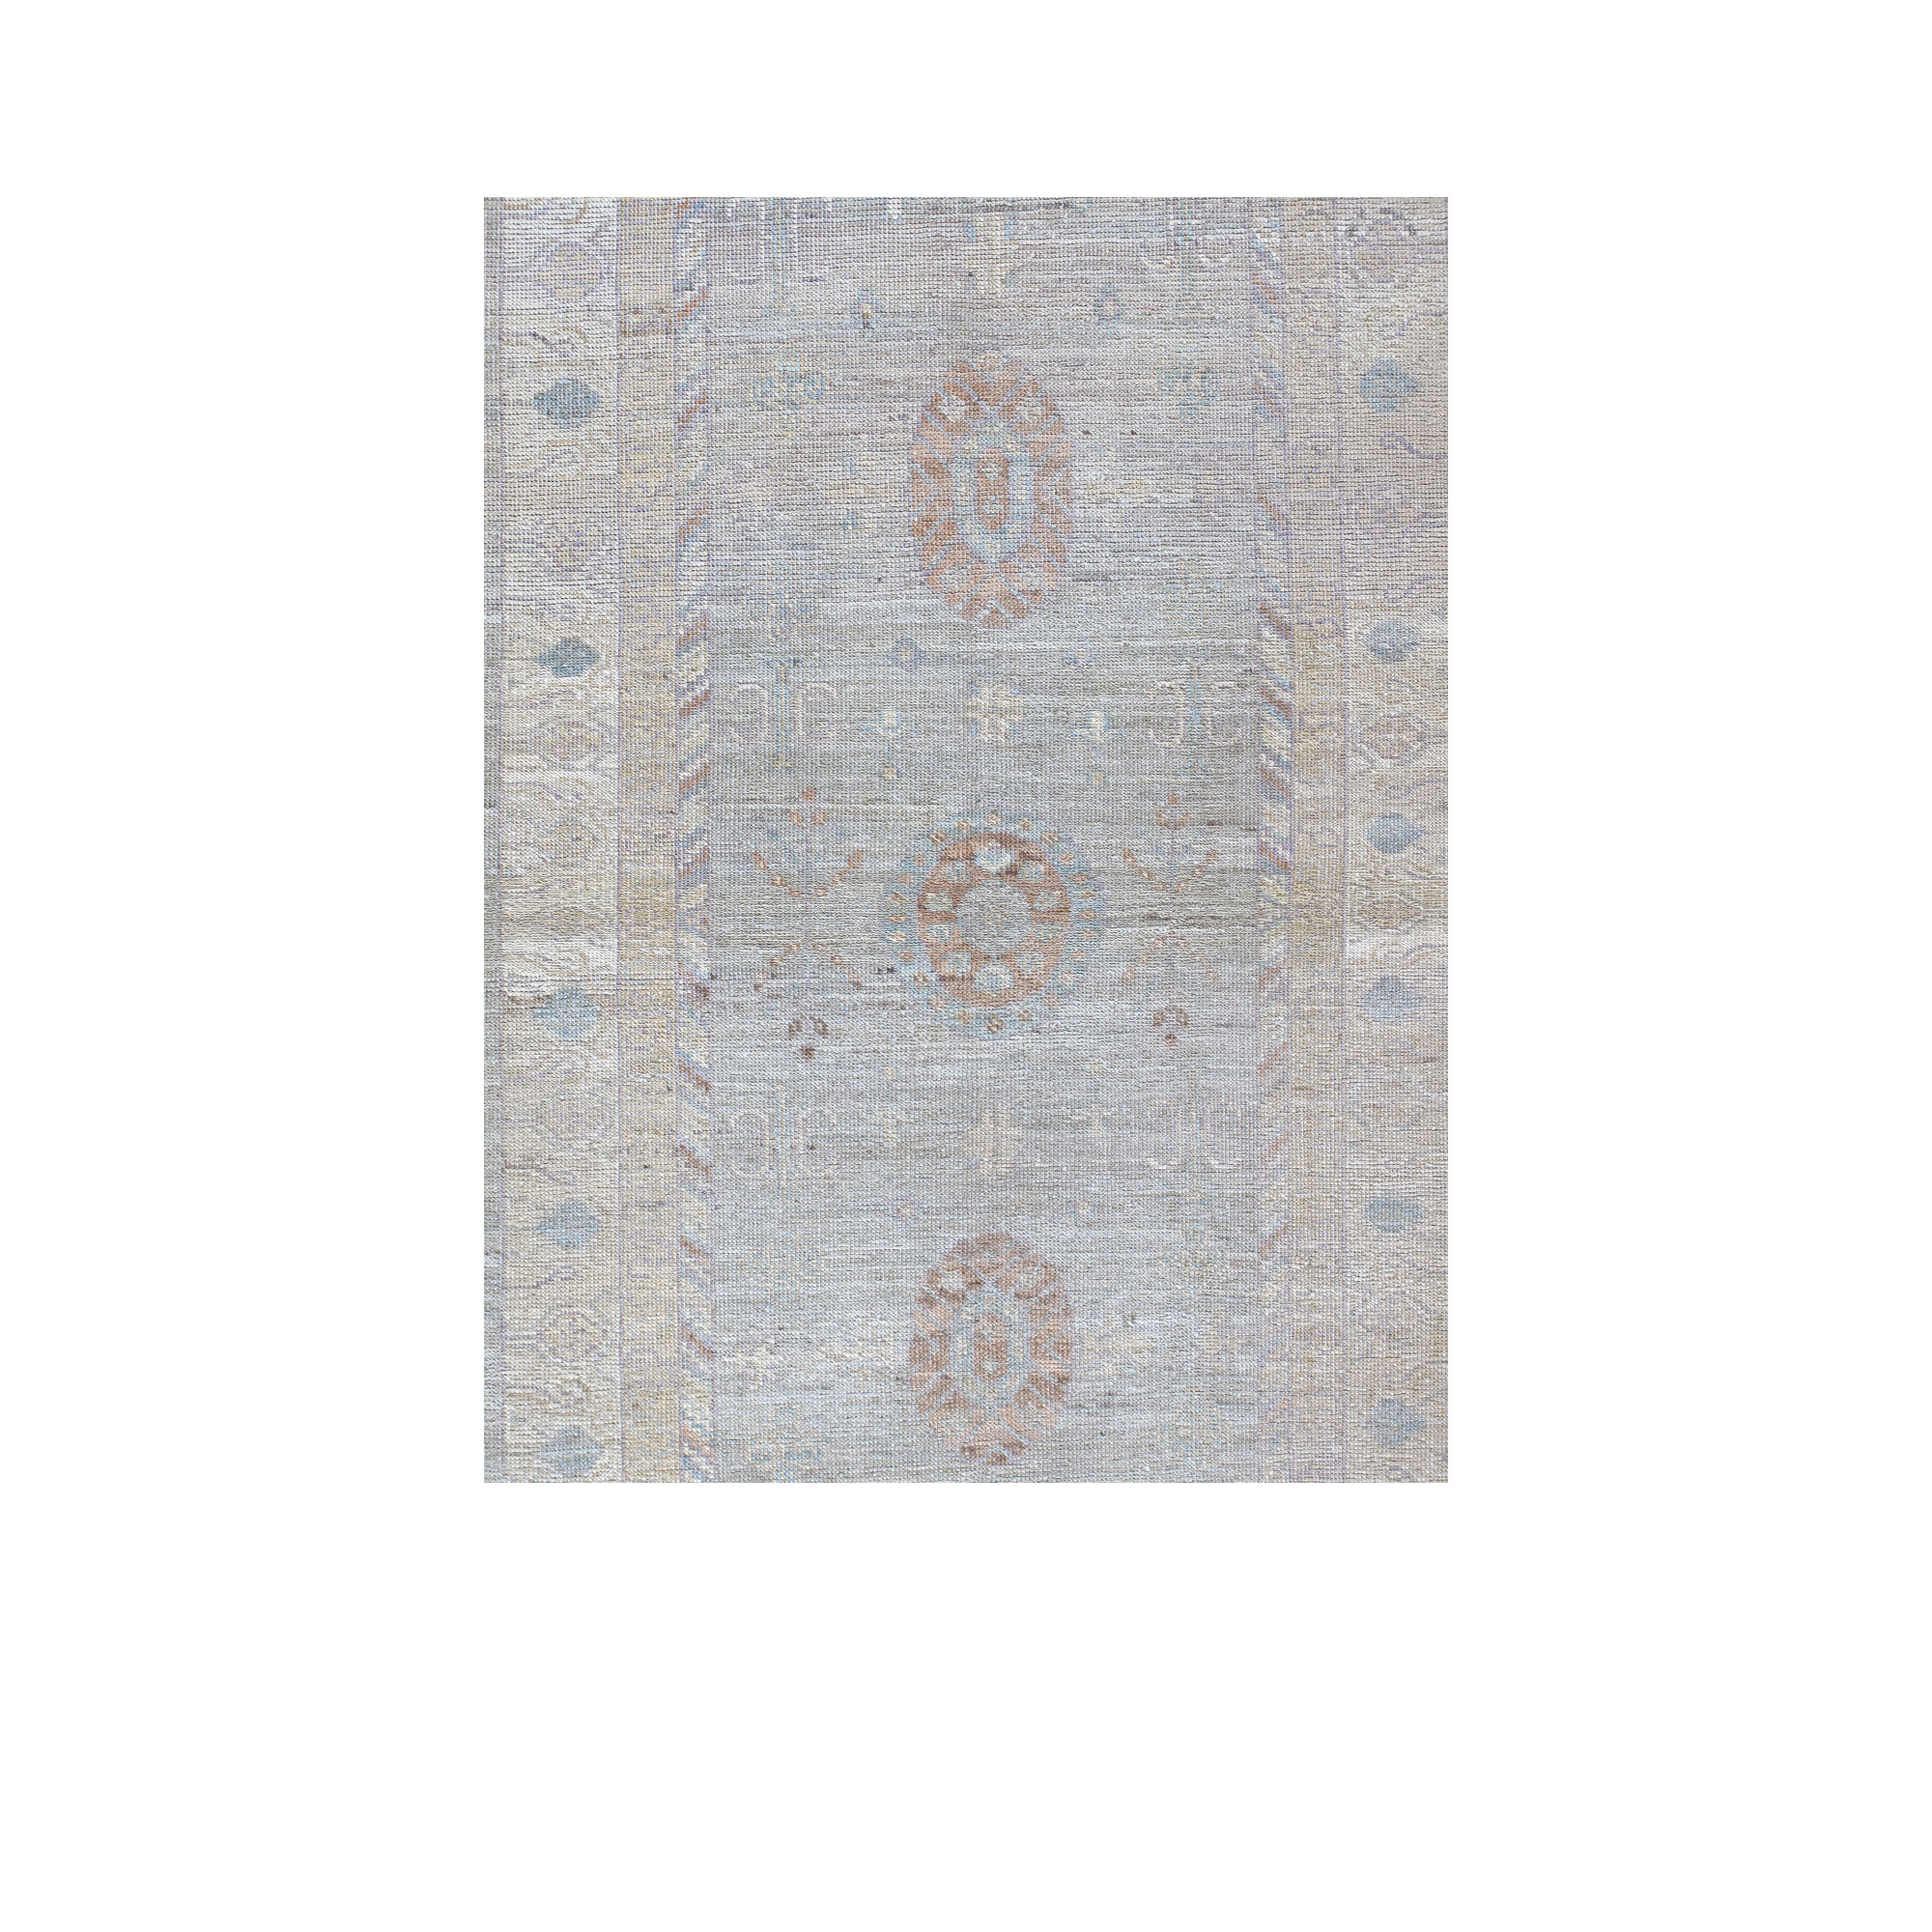 Samarghand rug is hand-knotted and made of 100% wool.